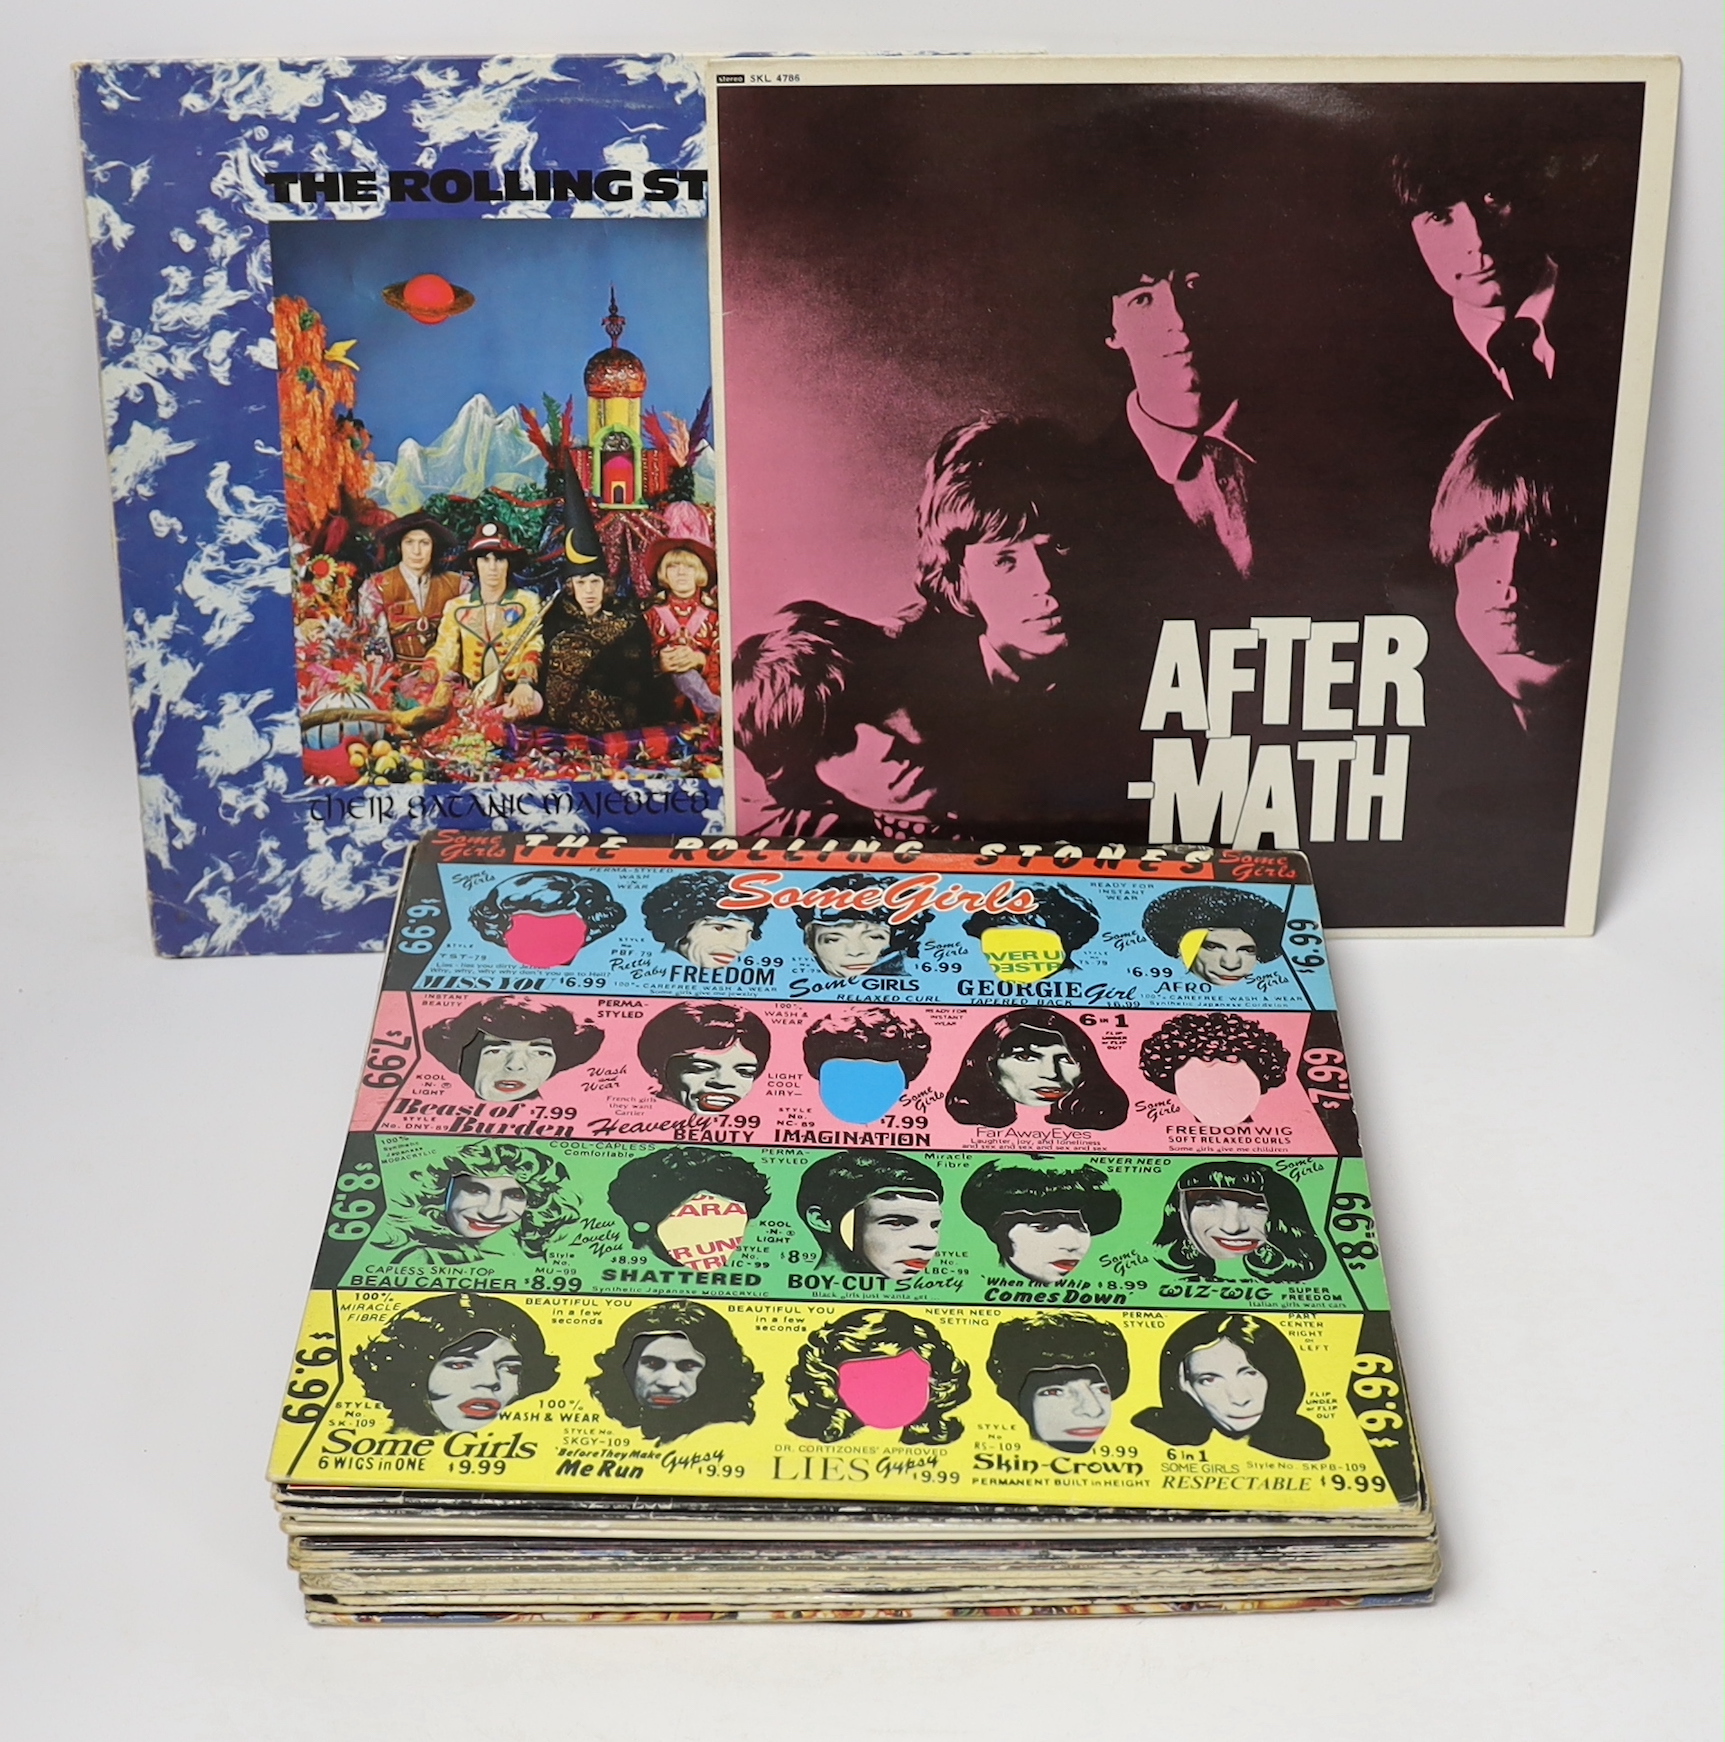 Sixteen LP albums by The Rolling Stones, and related, and Jimi Hendrix, including Aftermath, Their Satanic Majesties Request, Some Girls, Tattoo You, She’s the Boss, Gimme Some Neck, Band of Gypsies, Hendrix in the West,